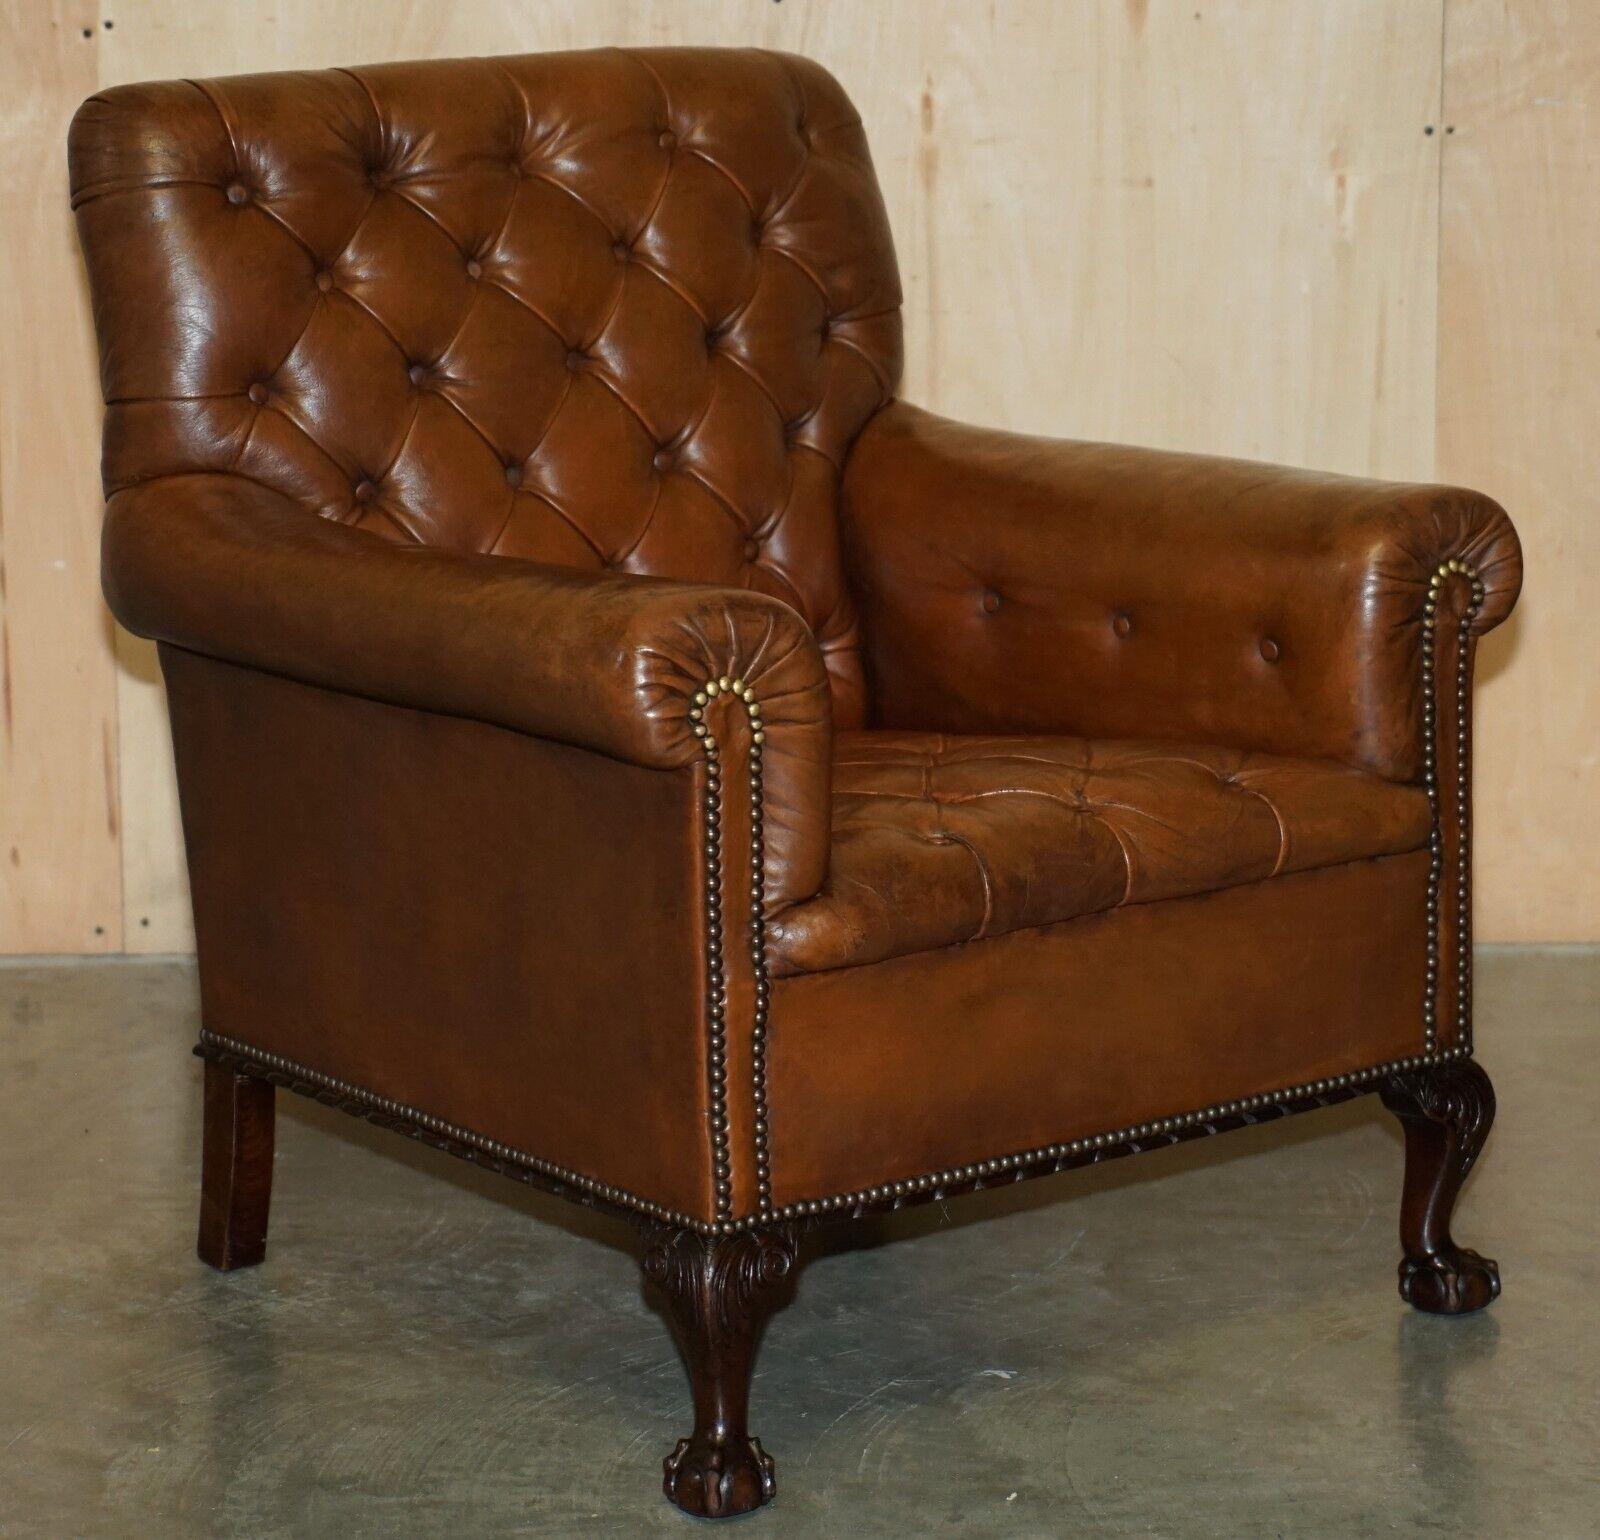 Royal House Antiques

Royal House Antiques is delighted to offer for sale this lovely pair of vintage Victorian circa 1880 lightly restored Chesterfield brown leather armchairs with hand carved Claw & Ball feet

Please note the delivery fee listed